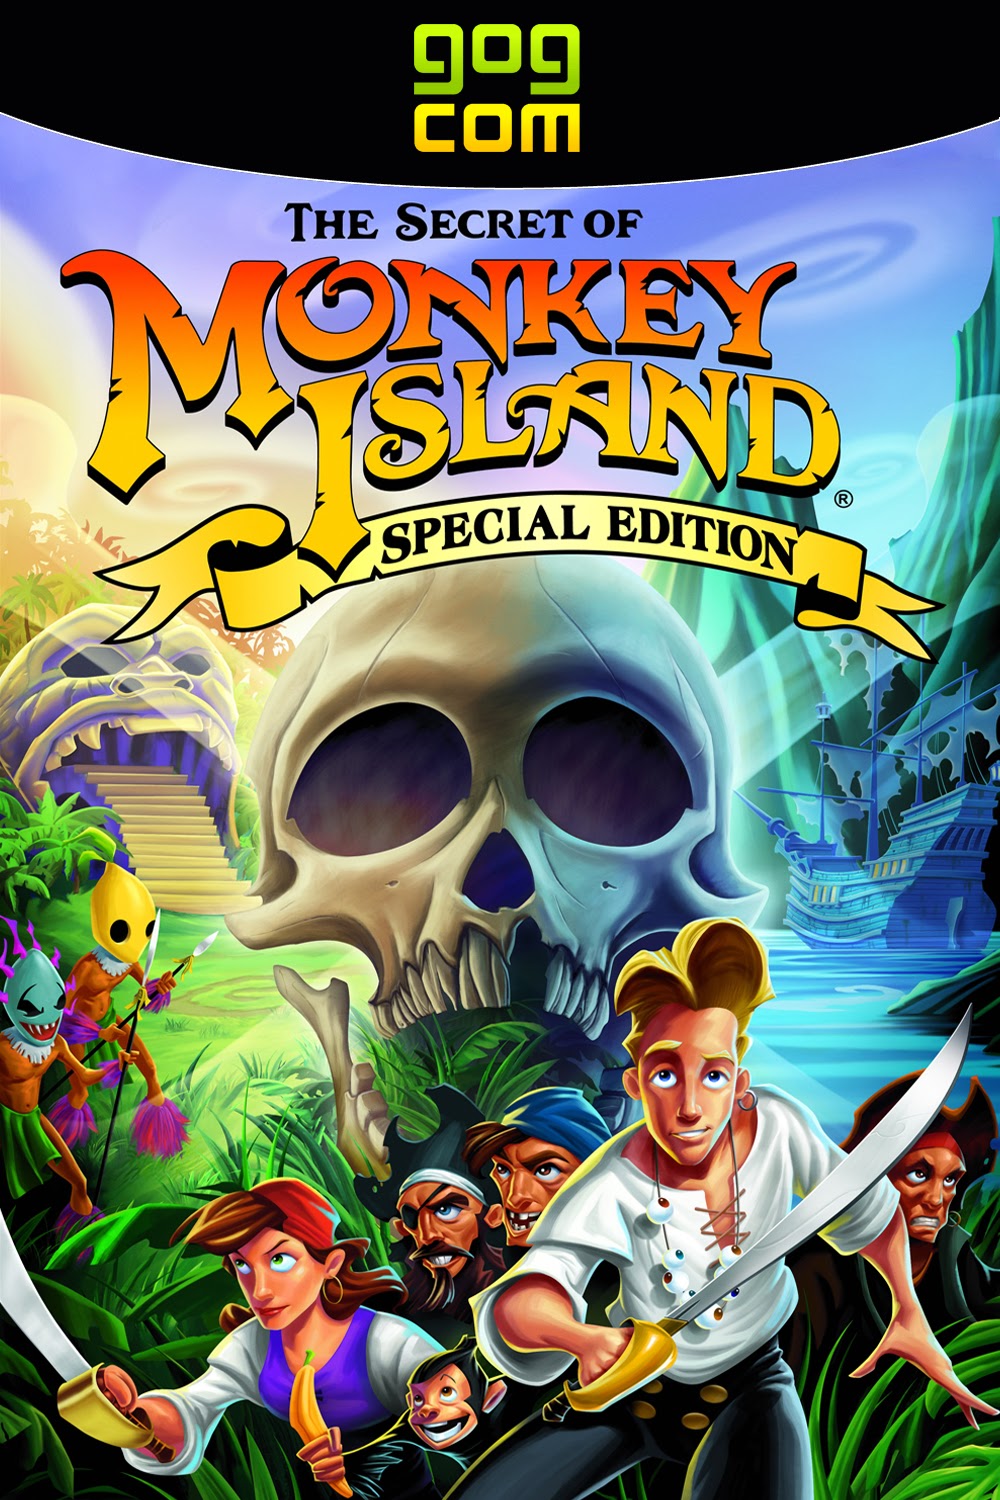 http://www.gog.com/game/the_secret_of_monkey_island_special_edition